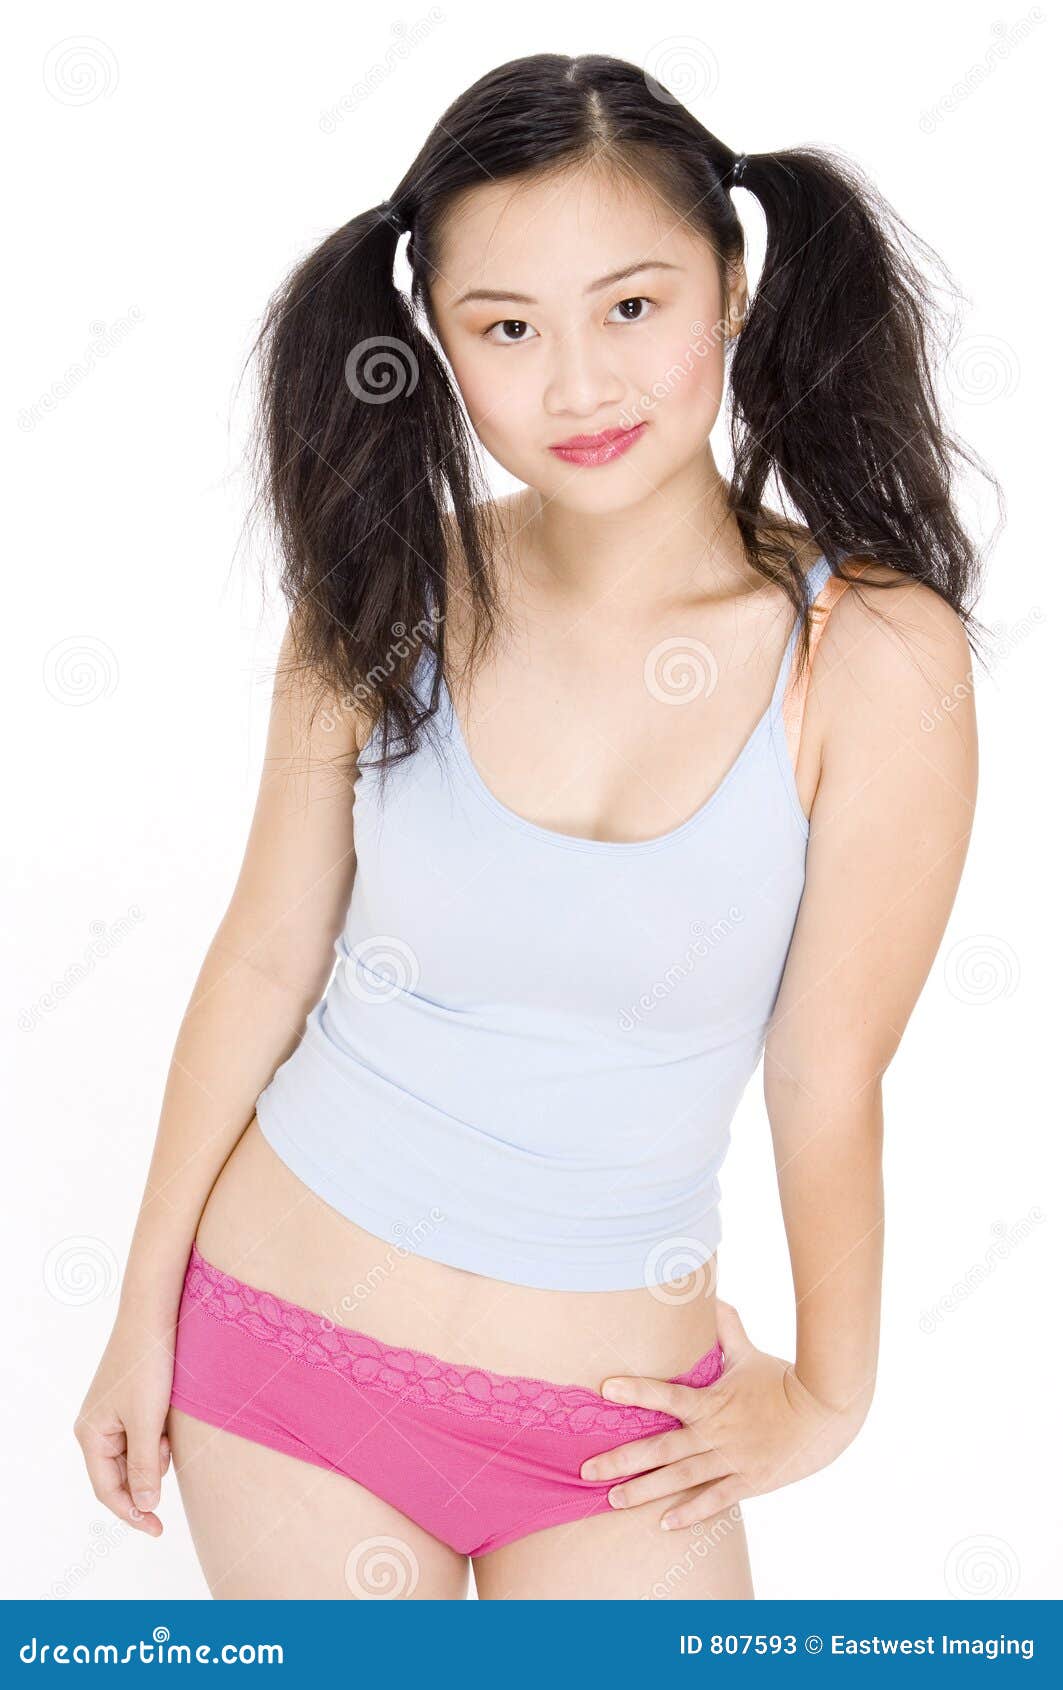 Colorful Teen stock image. Image of female, pose, woman - 807593